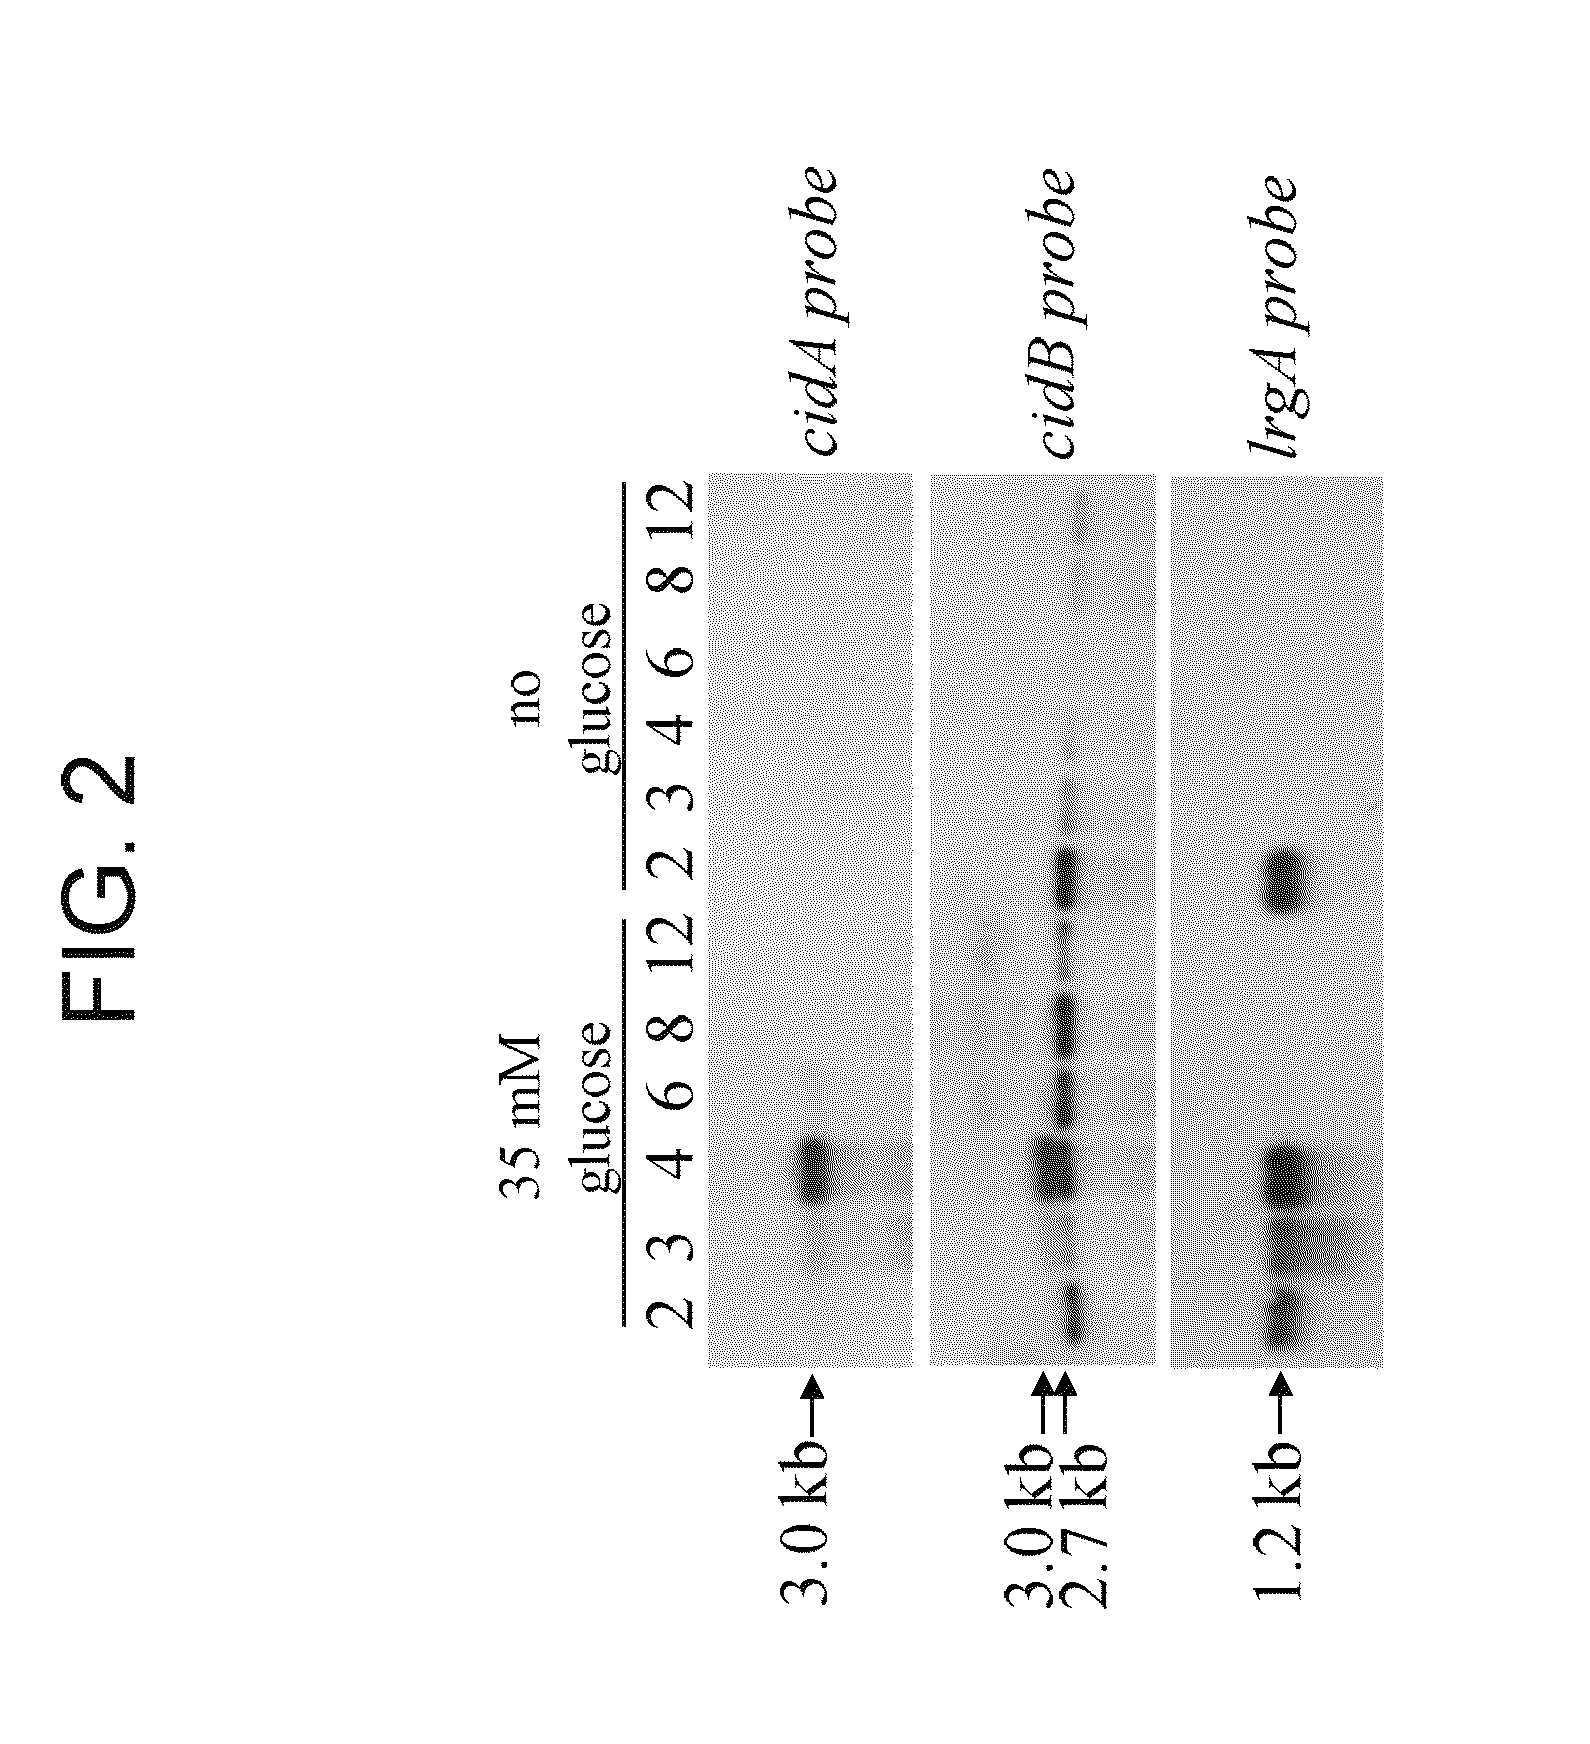 Methods for altering acetic acid production and enhancing cell death in bacteria